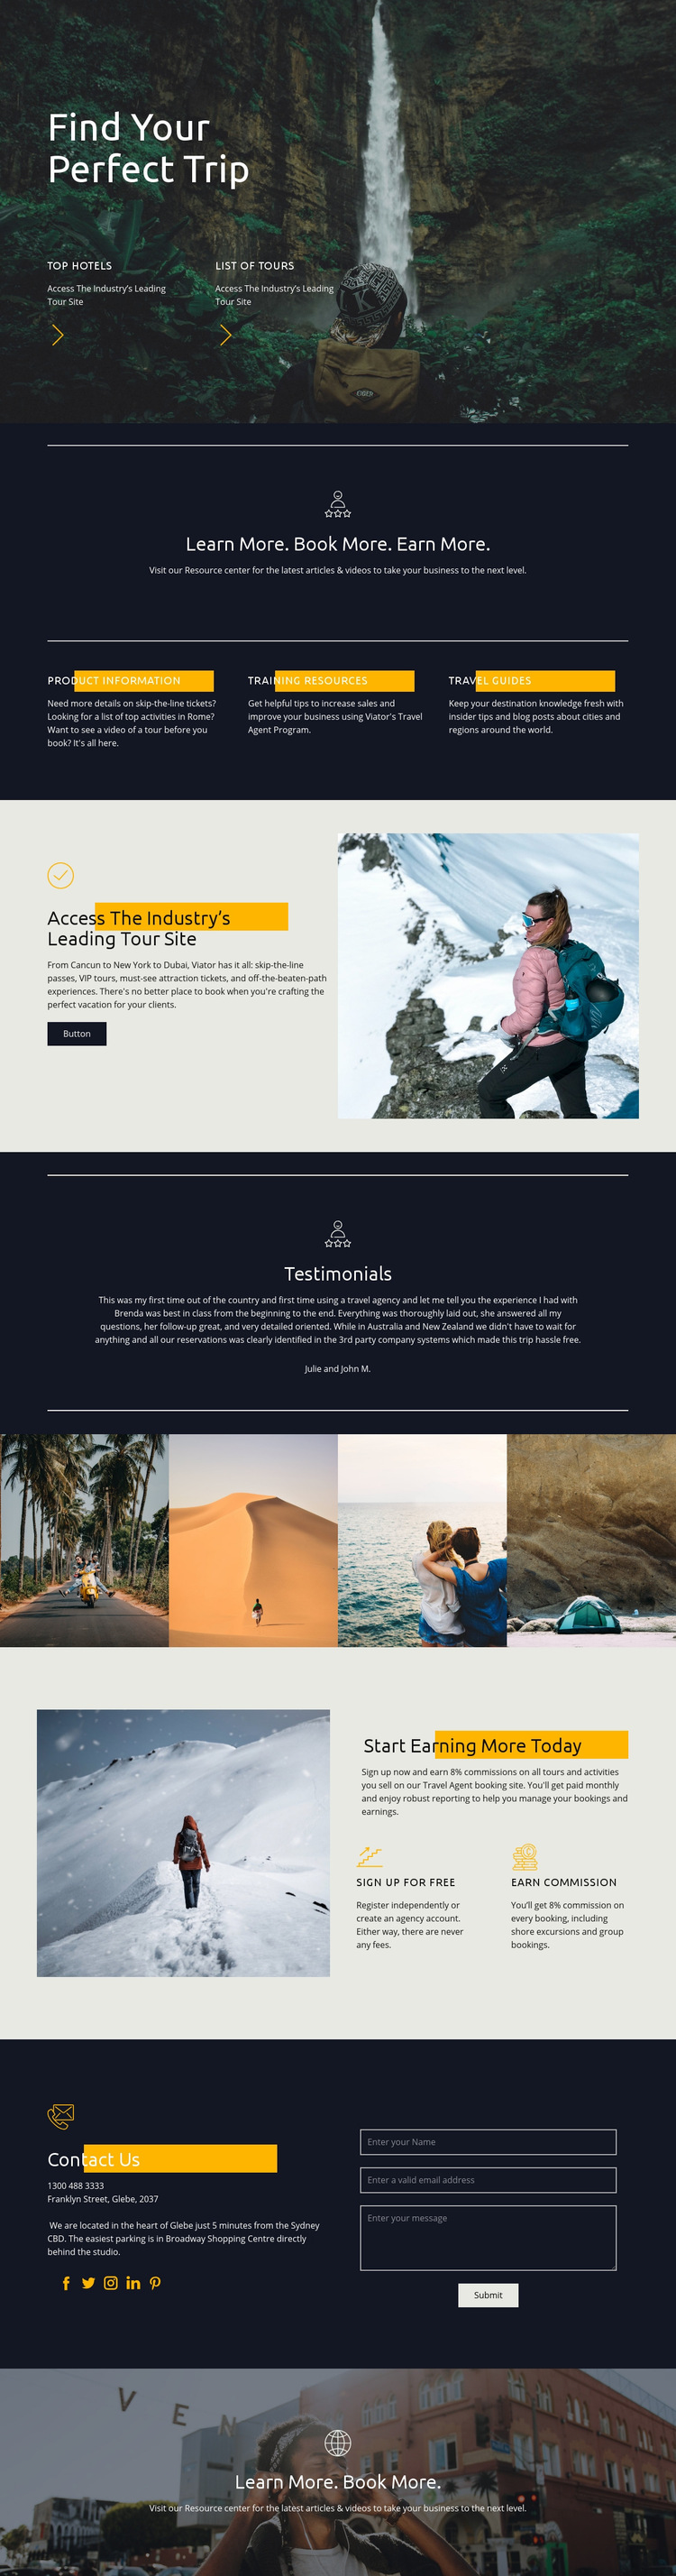 Find your perfect travel Web Page Design